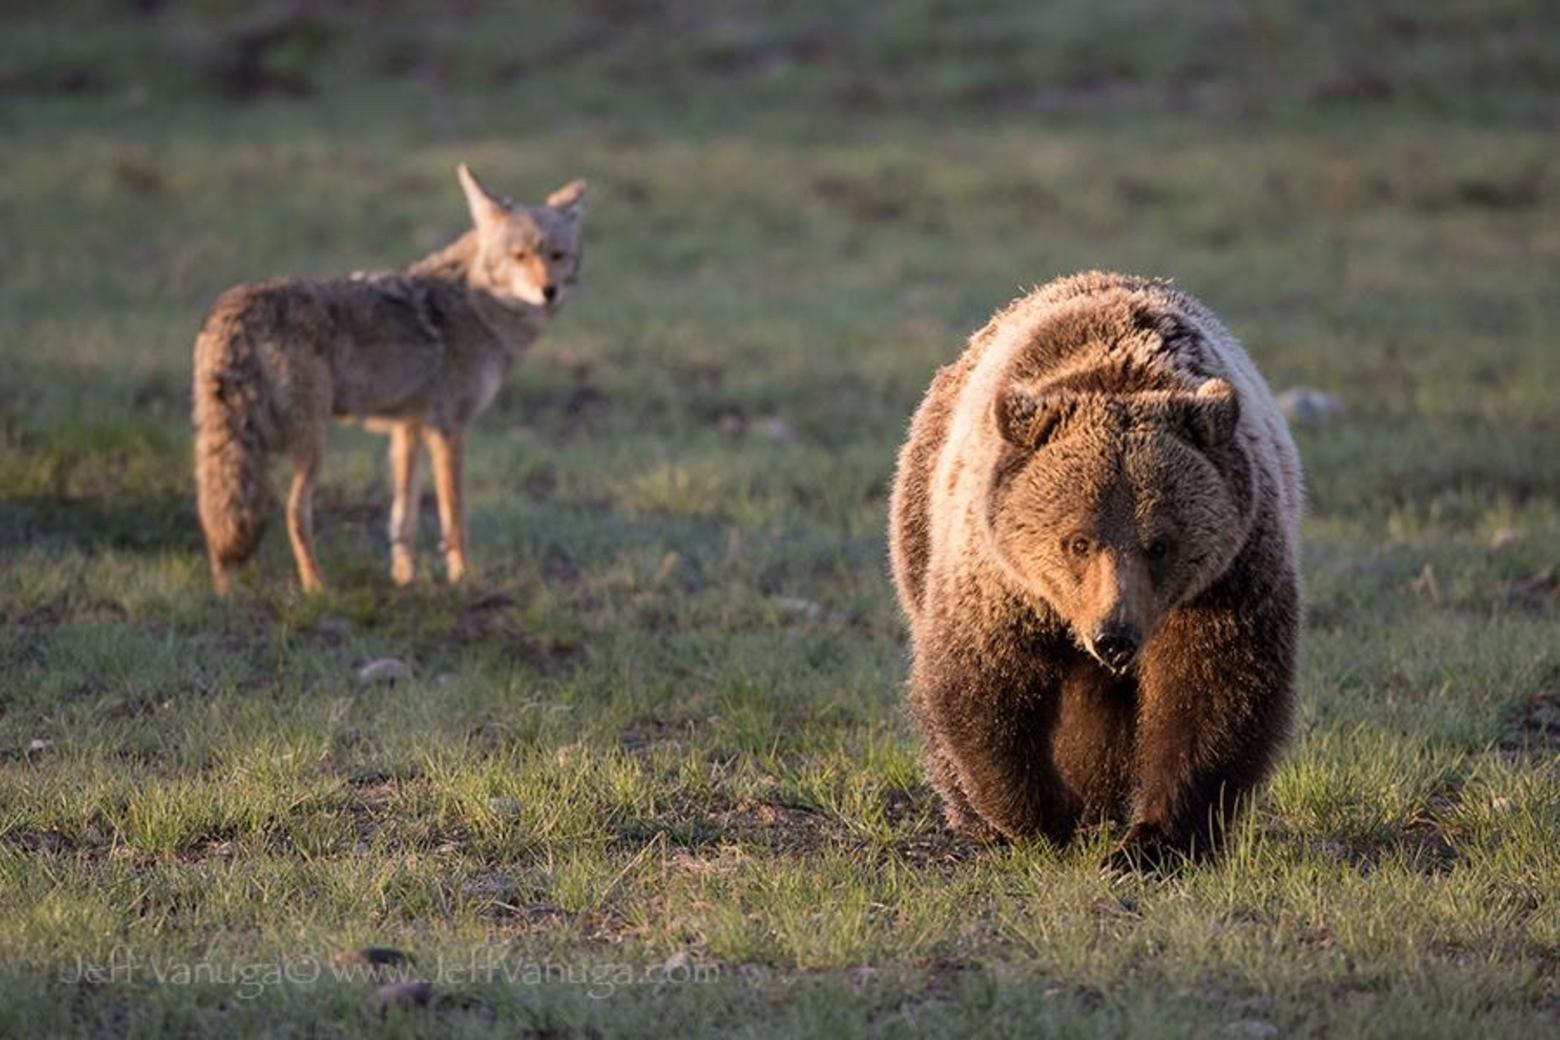 A grizzly passes a coyote in wild northwest Wyoming. Photo courtesy Jeff Vanuga. To see more of Vanuga's collectible fine art photography go to jeffvanuga.com